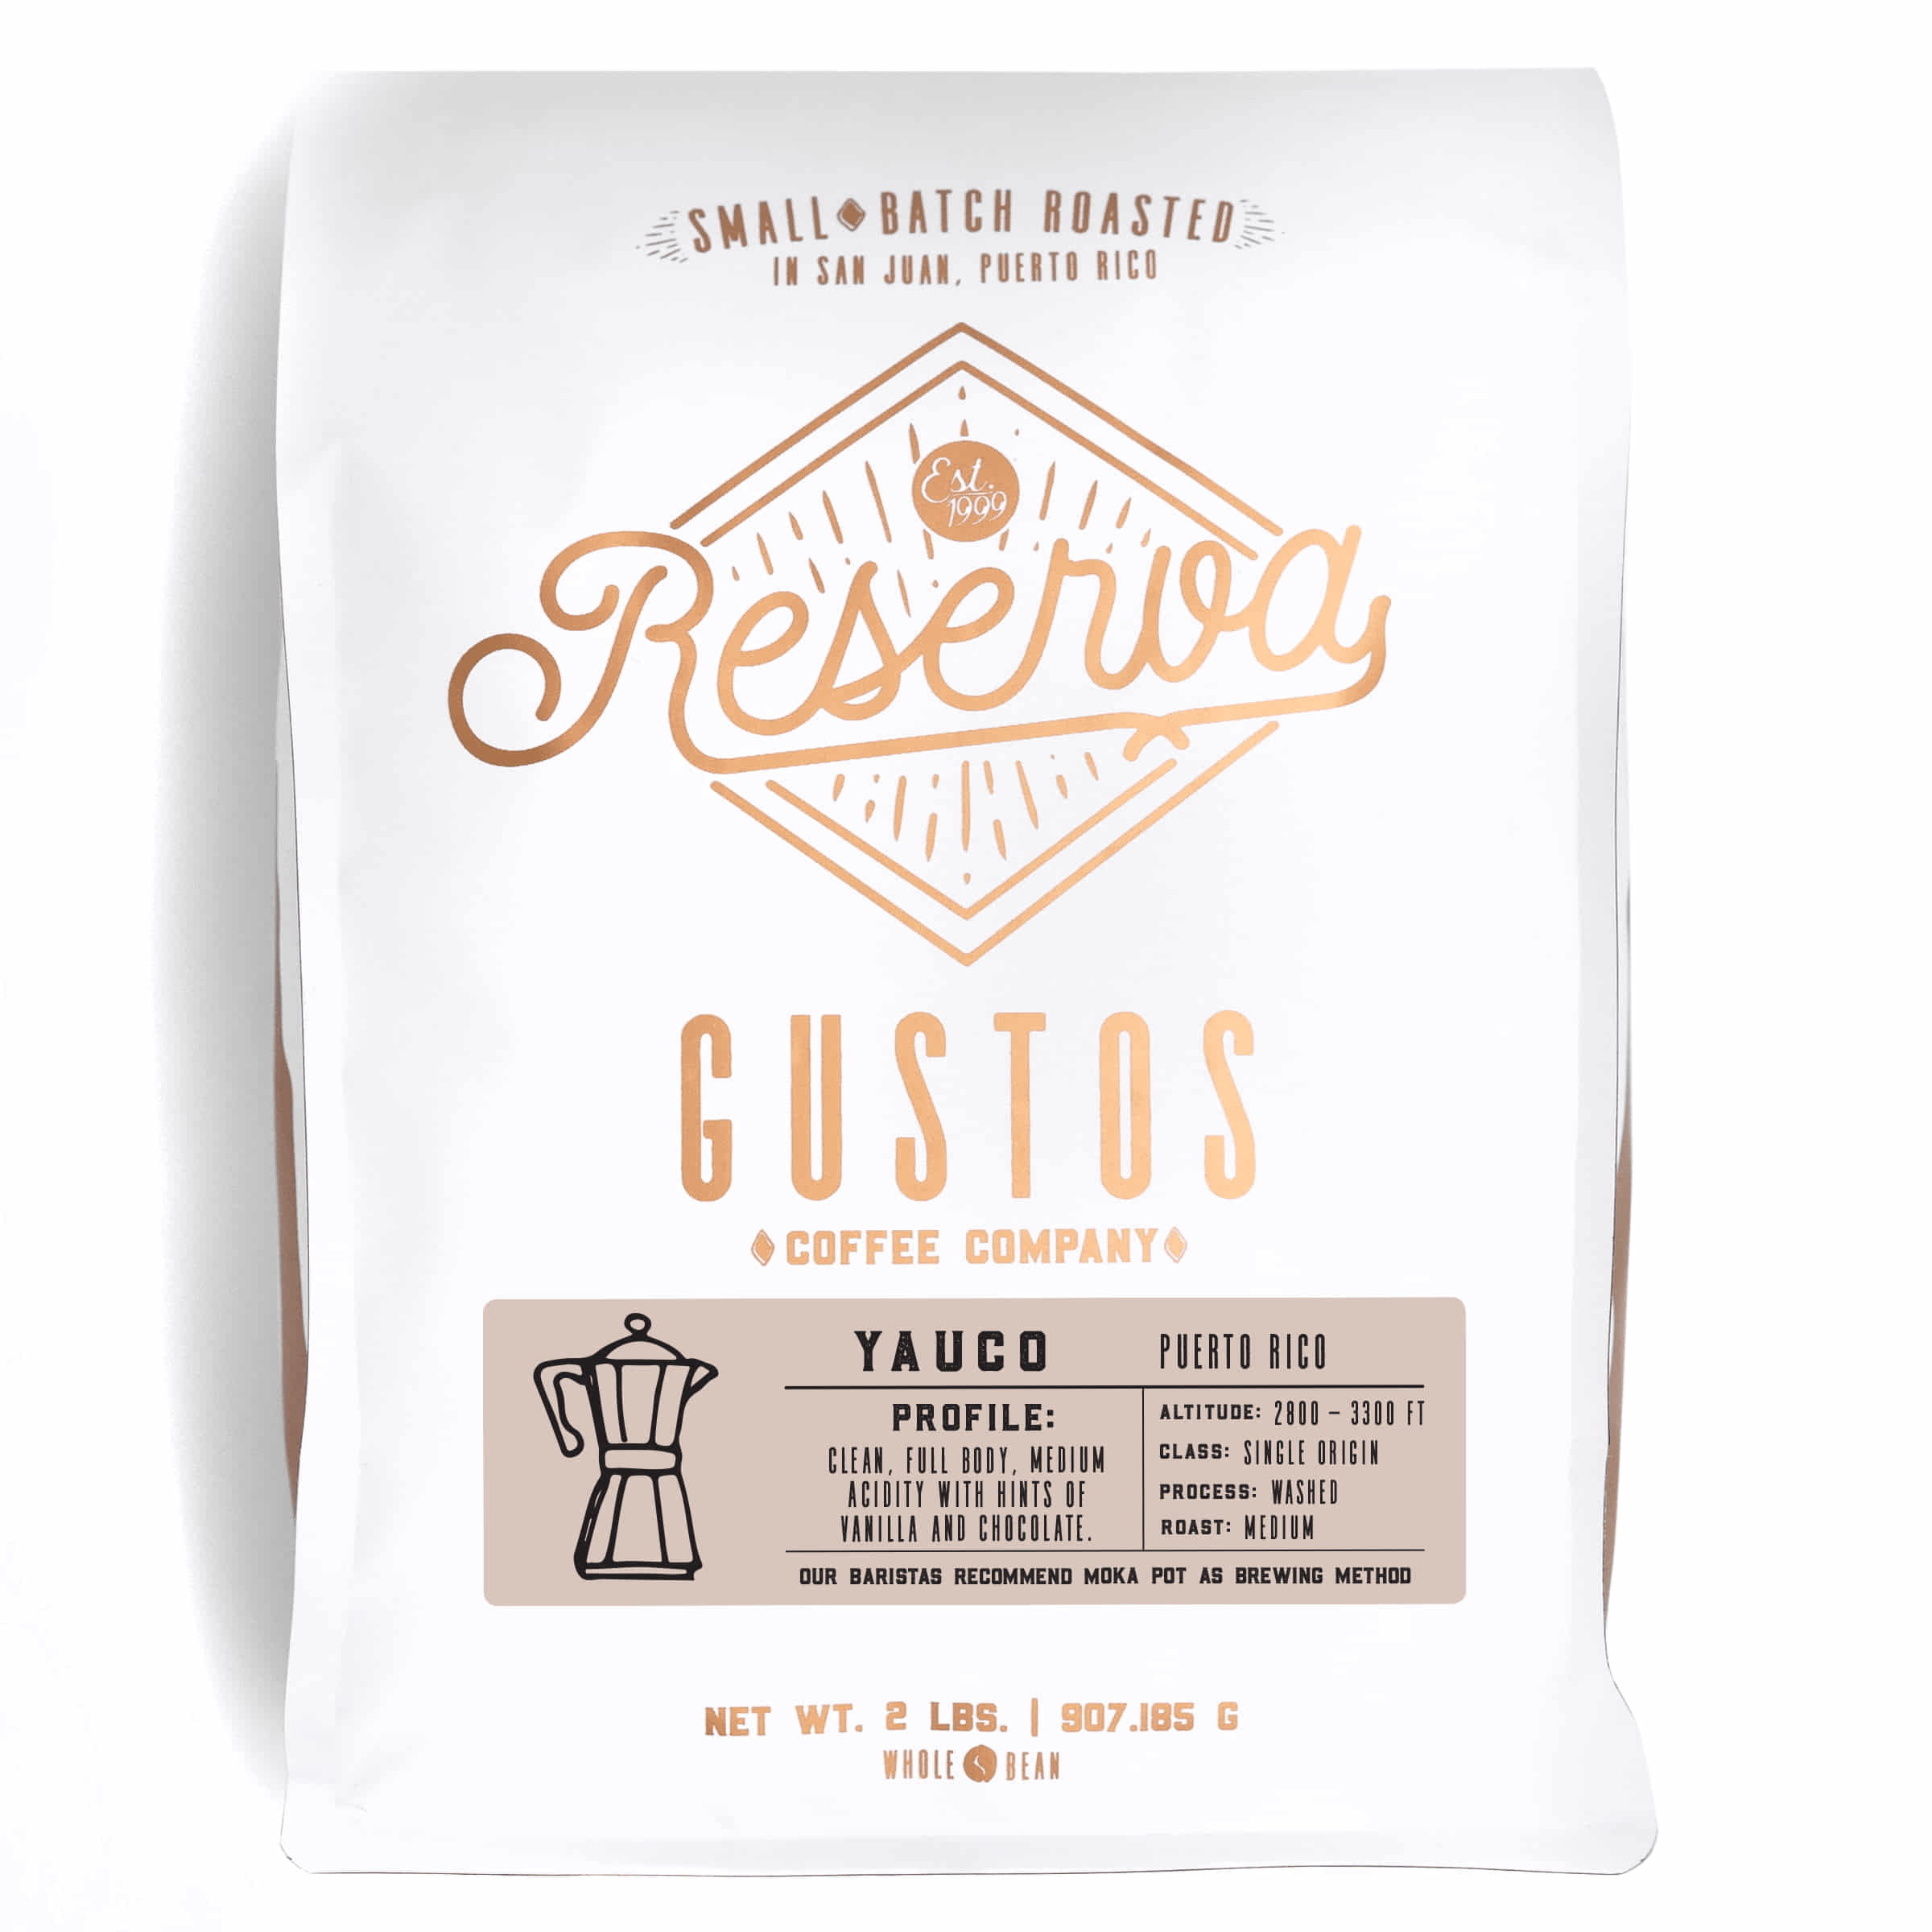 A 2lb bag of Specialty Coffee from Yauco Puerto Rico by Gustos Coffee Co Café